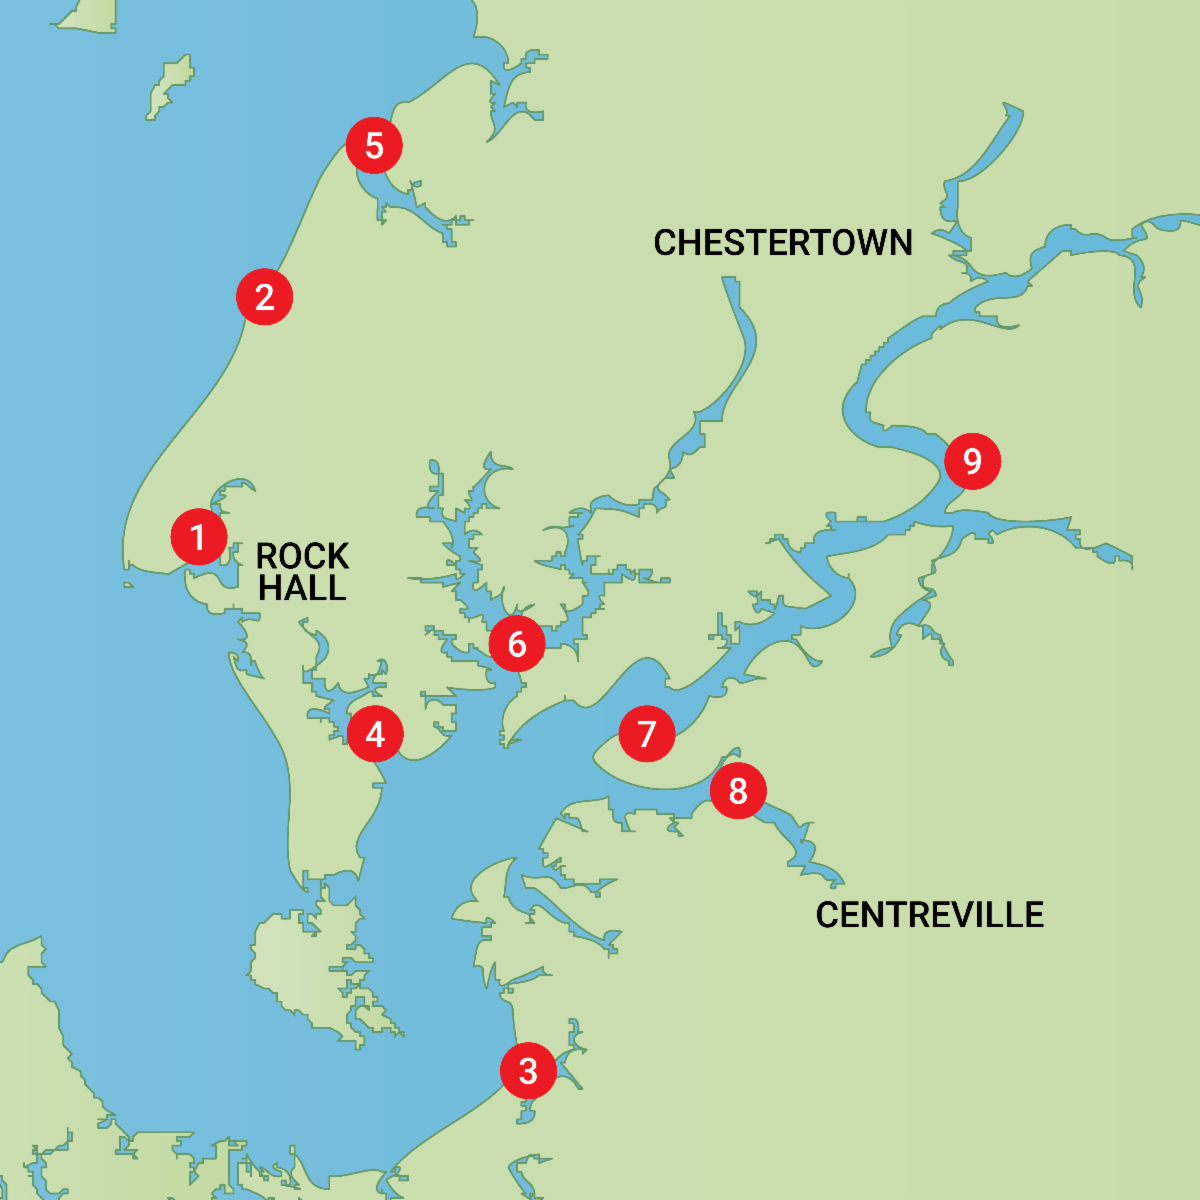 Illustrated map of the Chesapeake Bay with numbers indicating specific locations